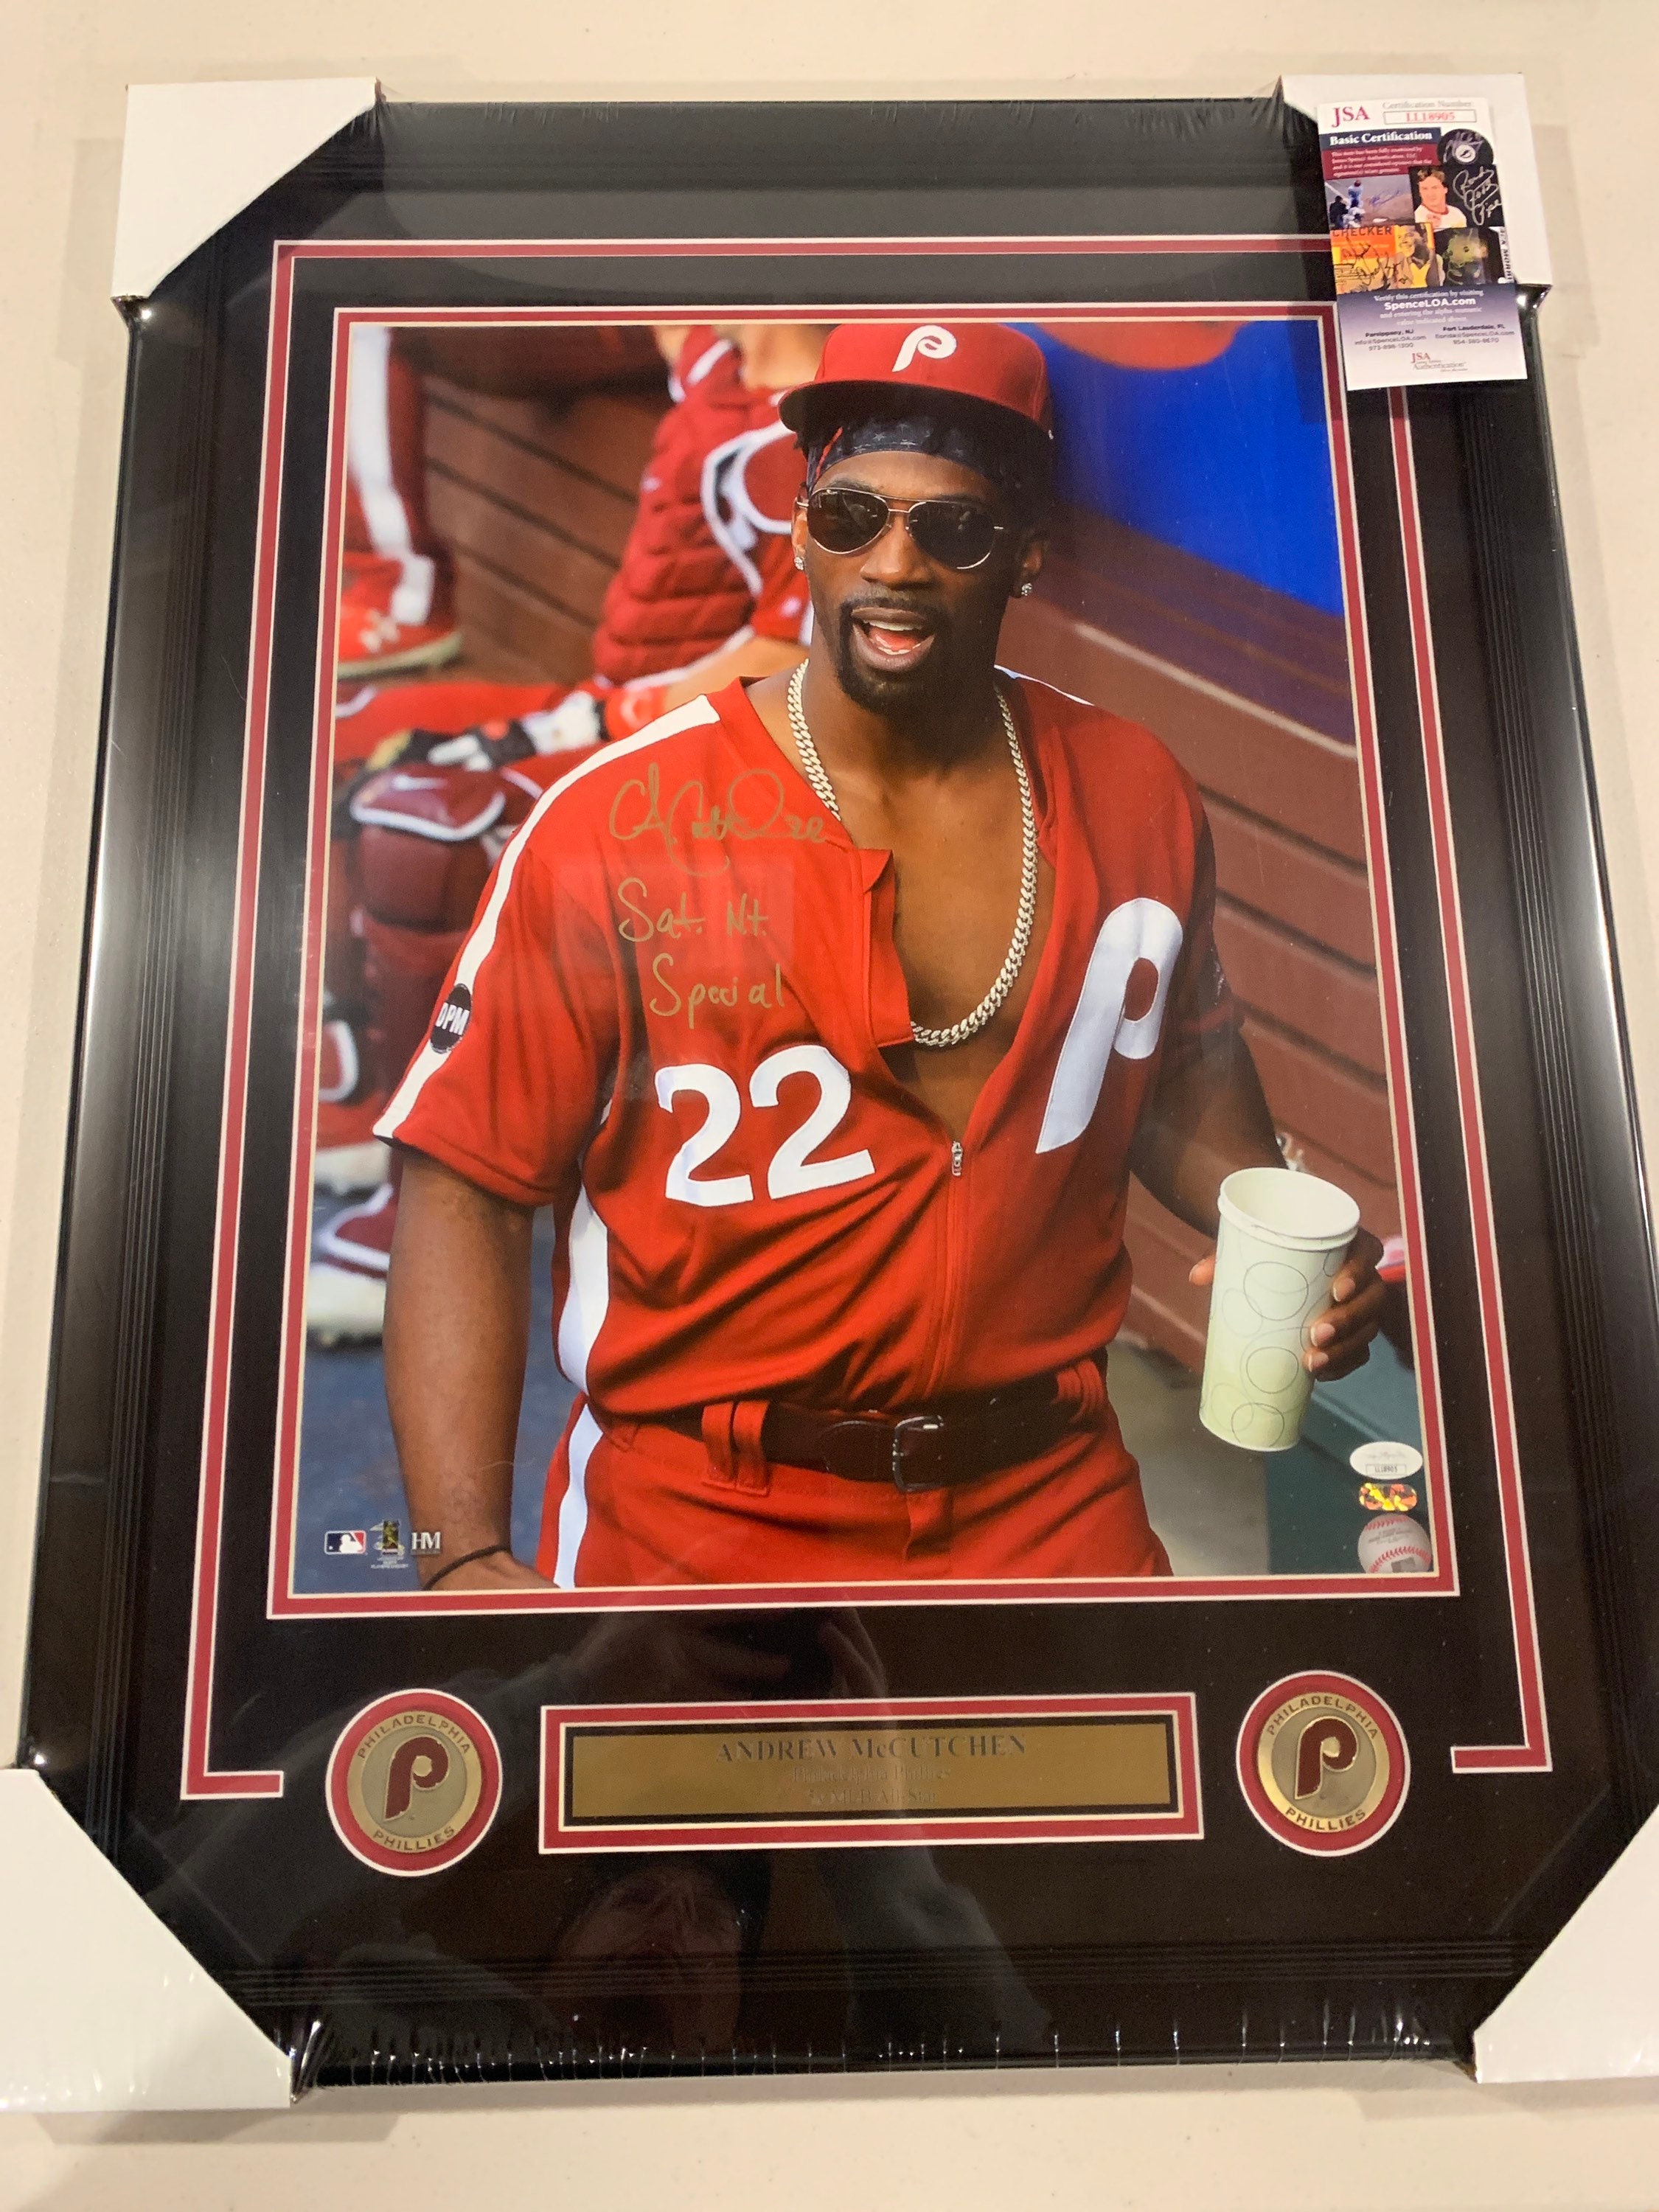 Andrew Mccutchen Autograph Signed Phillies Inscribed Sat NT 